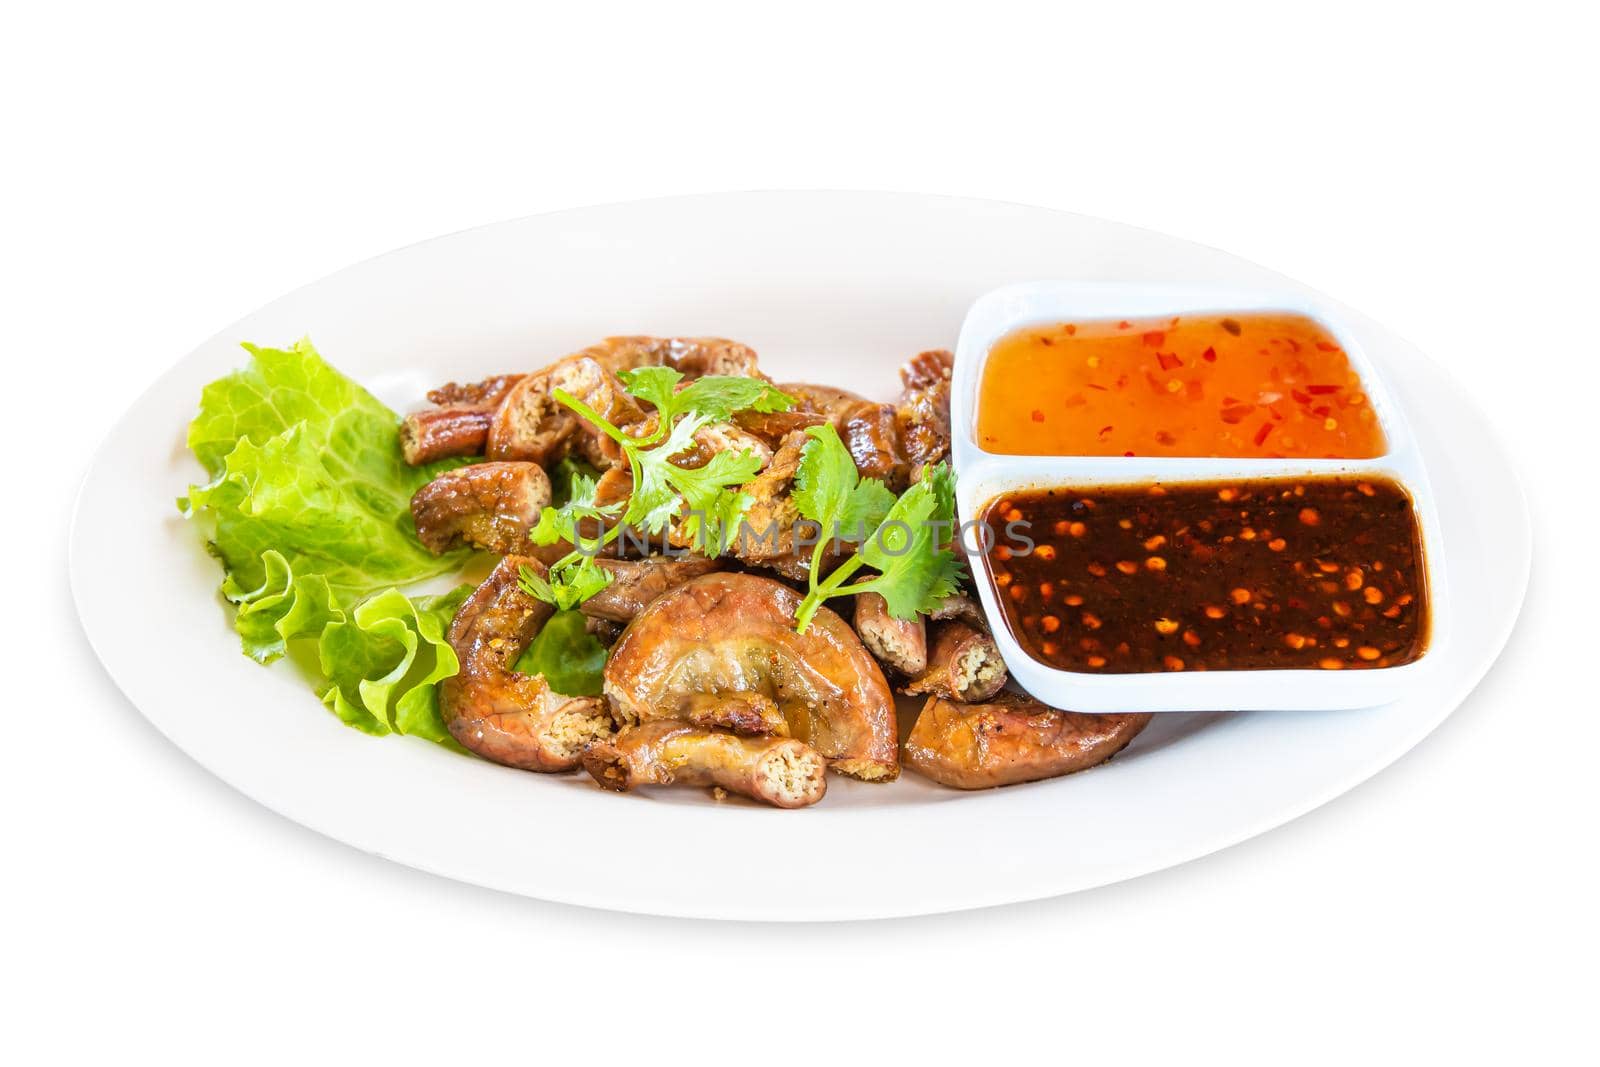 Pig's intestines grilled with sauce by stoonn